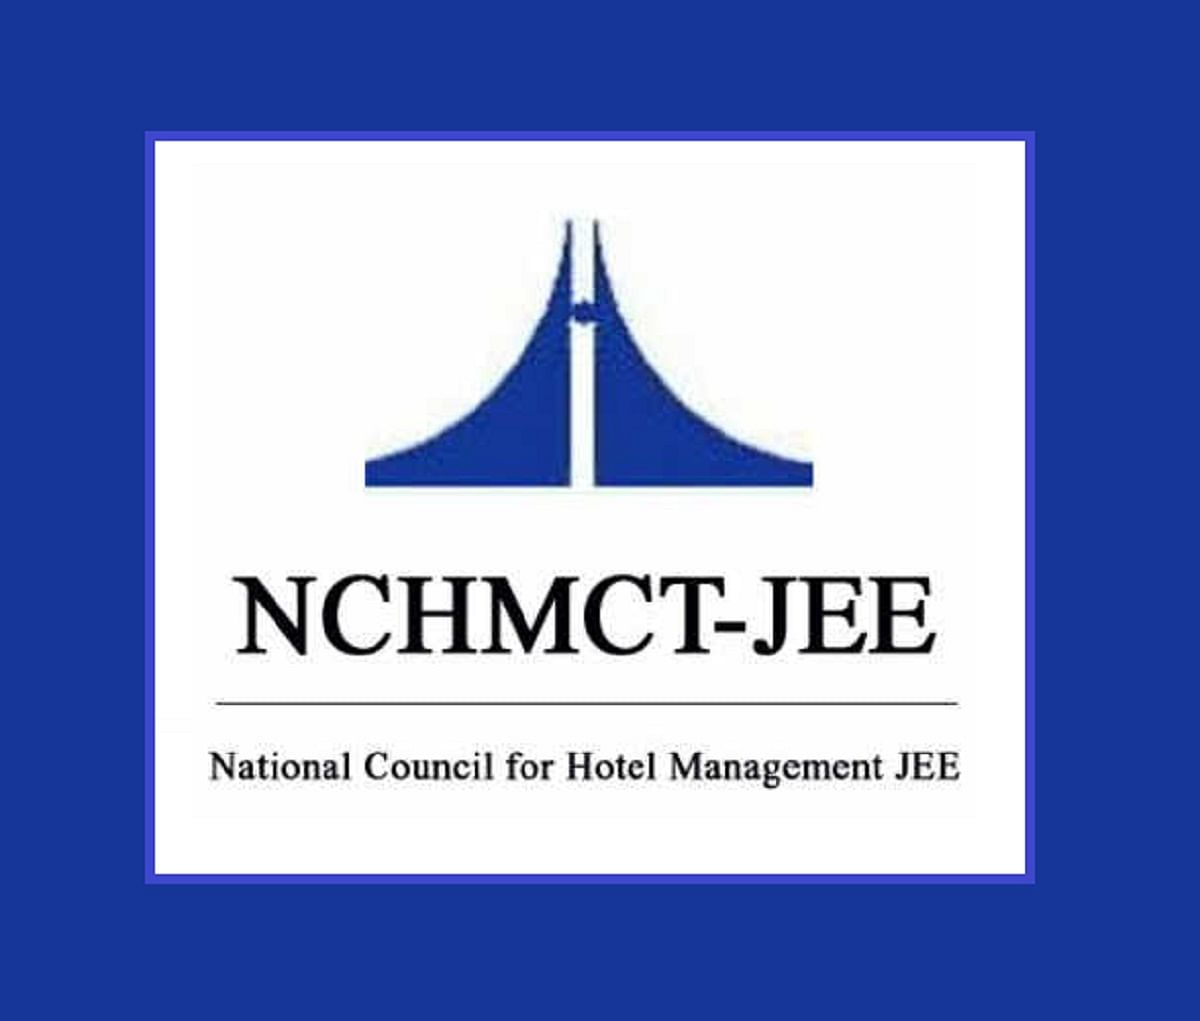 NCHMCT JEE 2022: Application Deadline Extended, Know New Dates Here